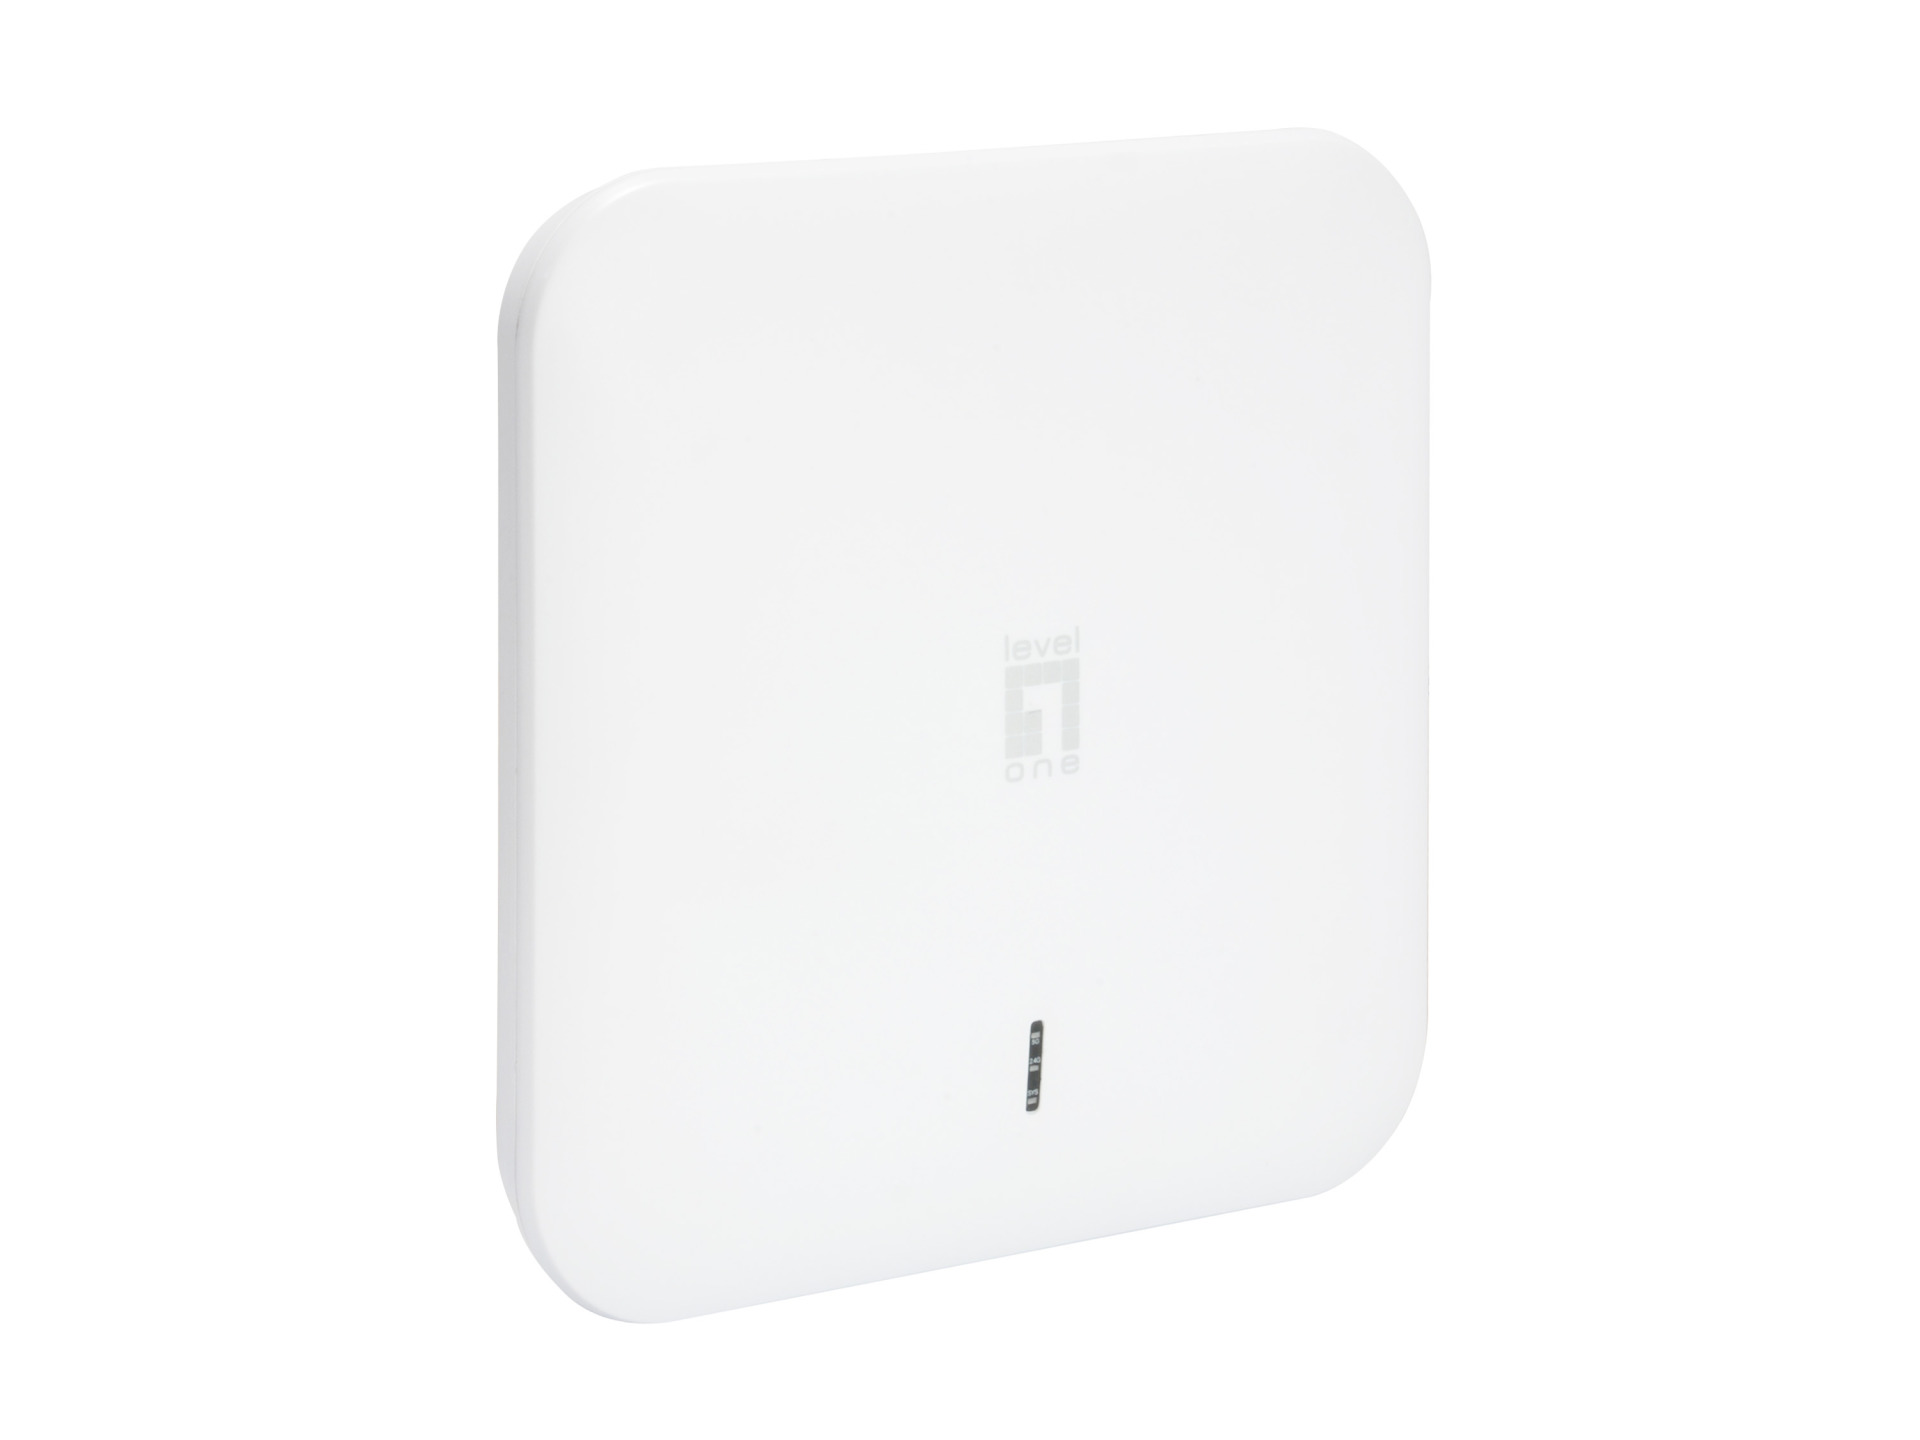 Managed PoE WLAN-Decken/Wand-Access-Point, 1200Mbit/s, Dual Band, MU-MIMO